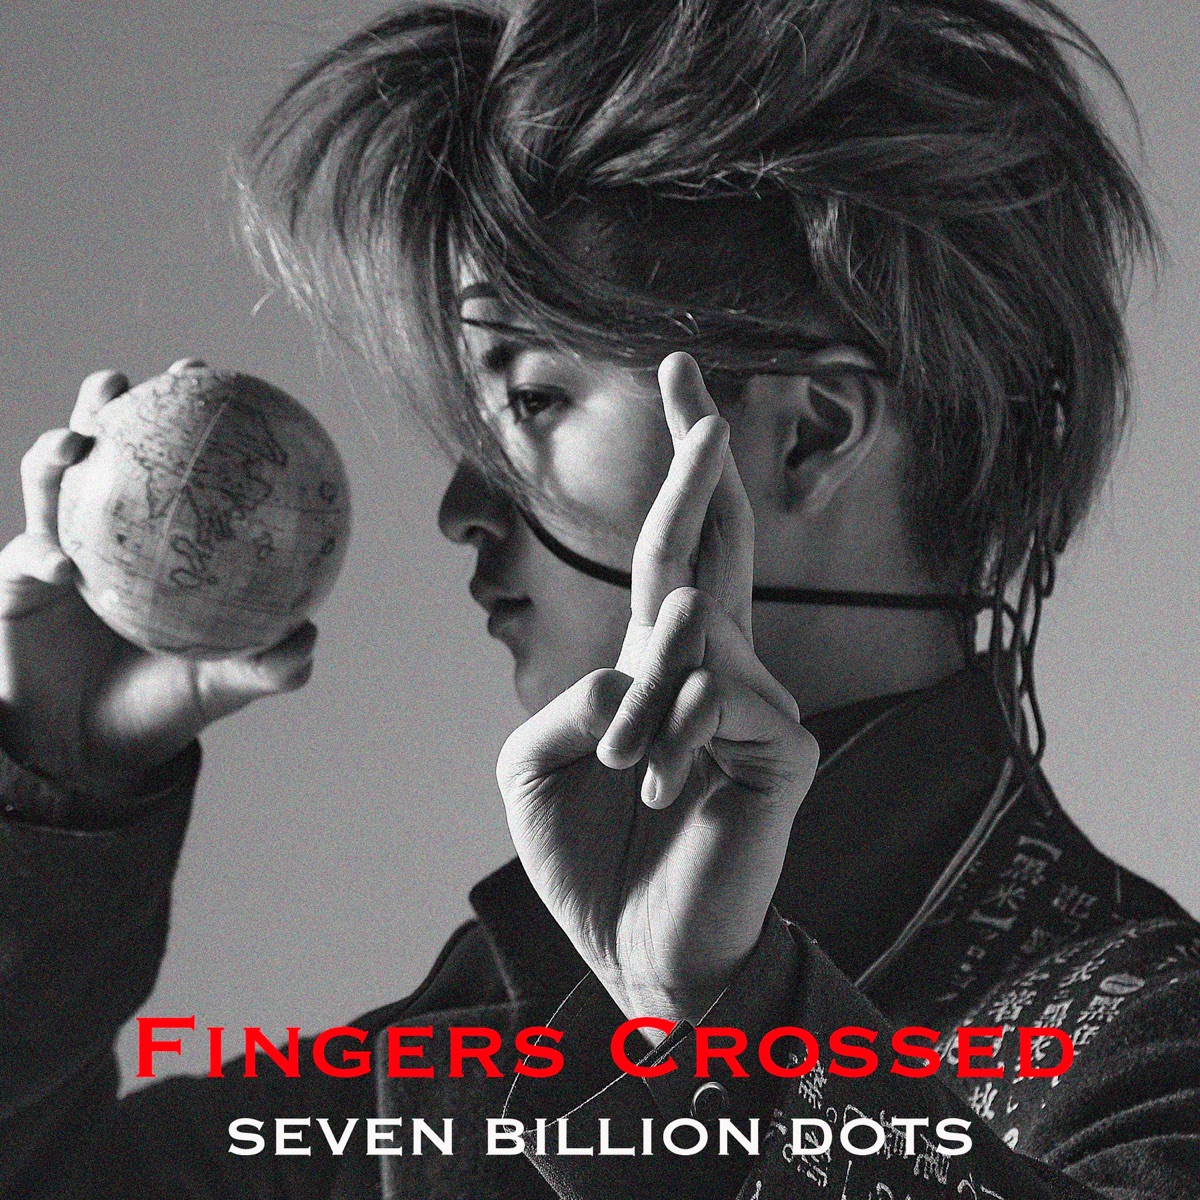 『Seven Billion Dots - Let's get the party started』収録の『HOPE』ジャケット